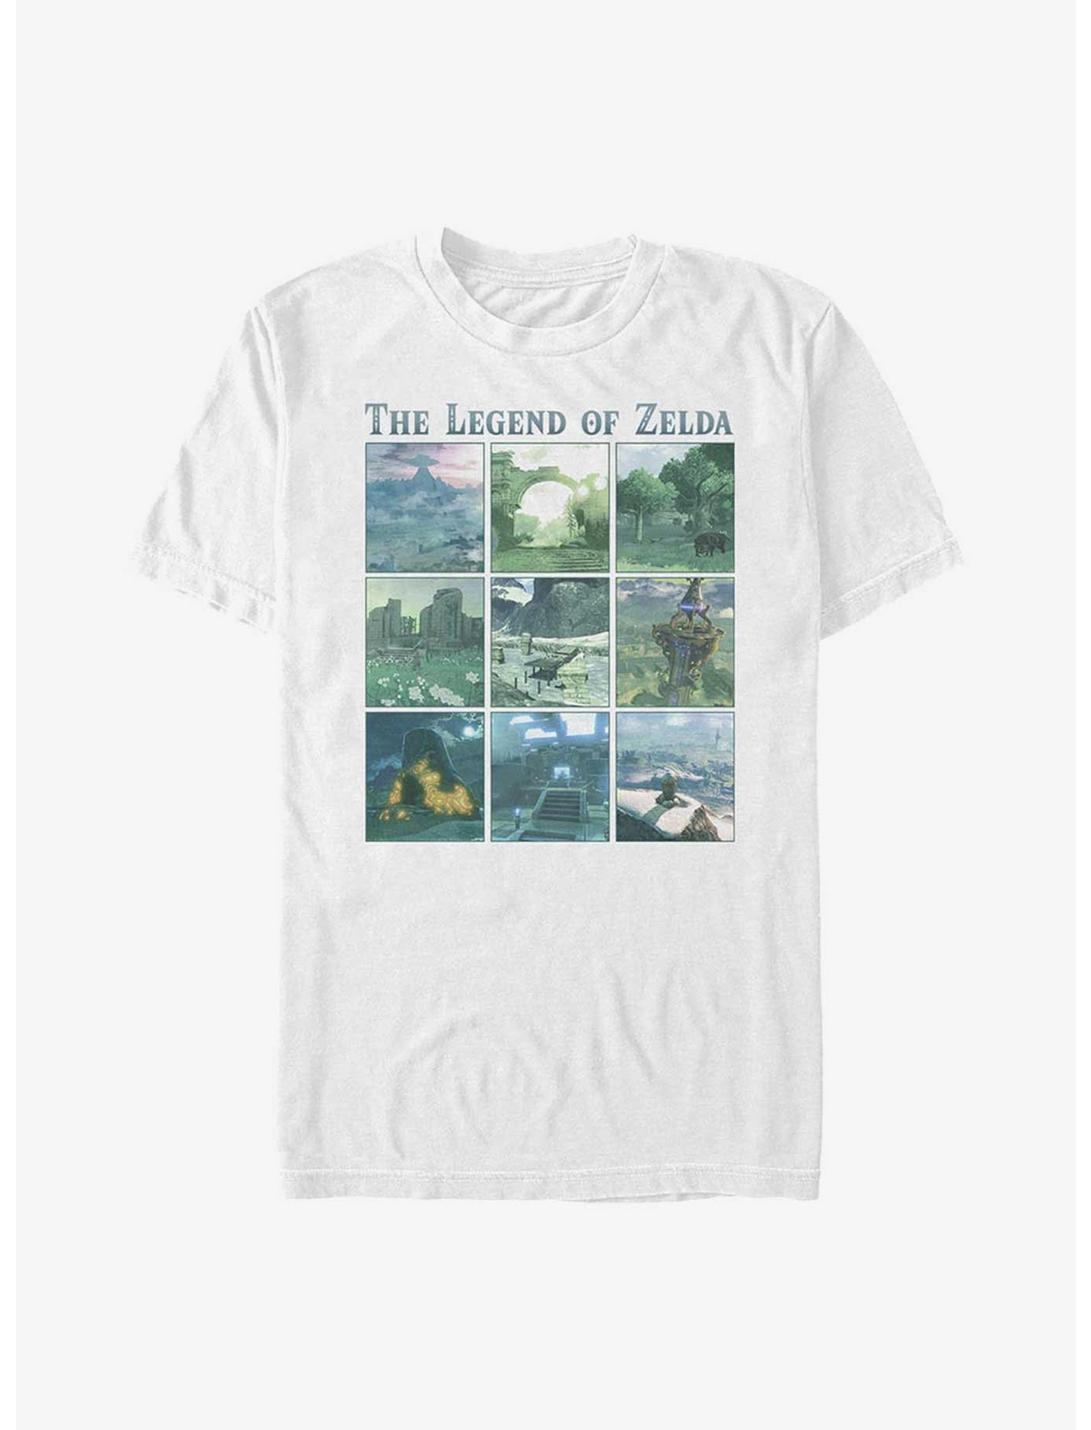 Nintendo The Legend Of Zelda Breath Of The Wild Locations T-Shirt, WHITE, hi-res